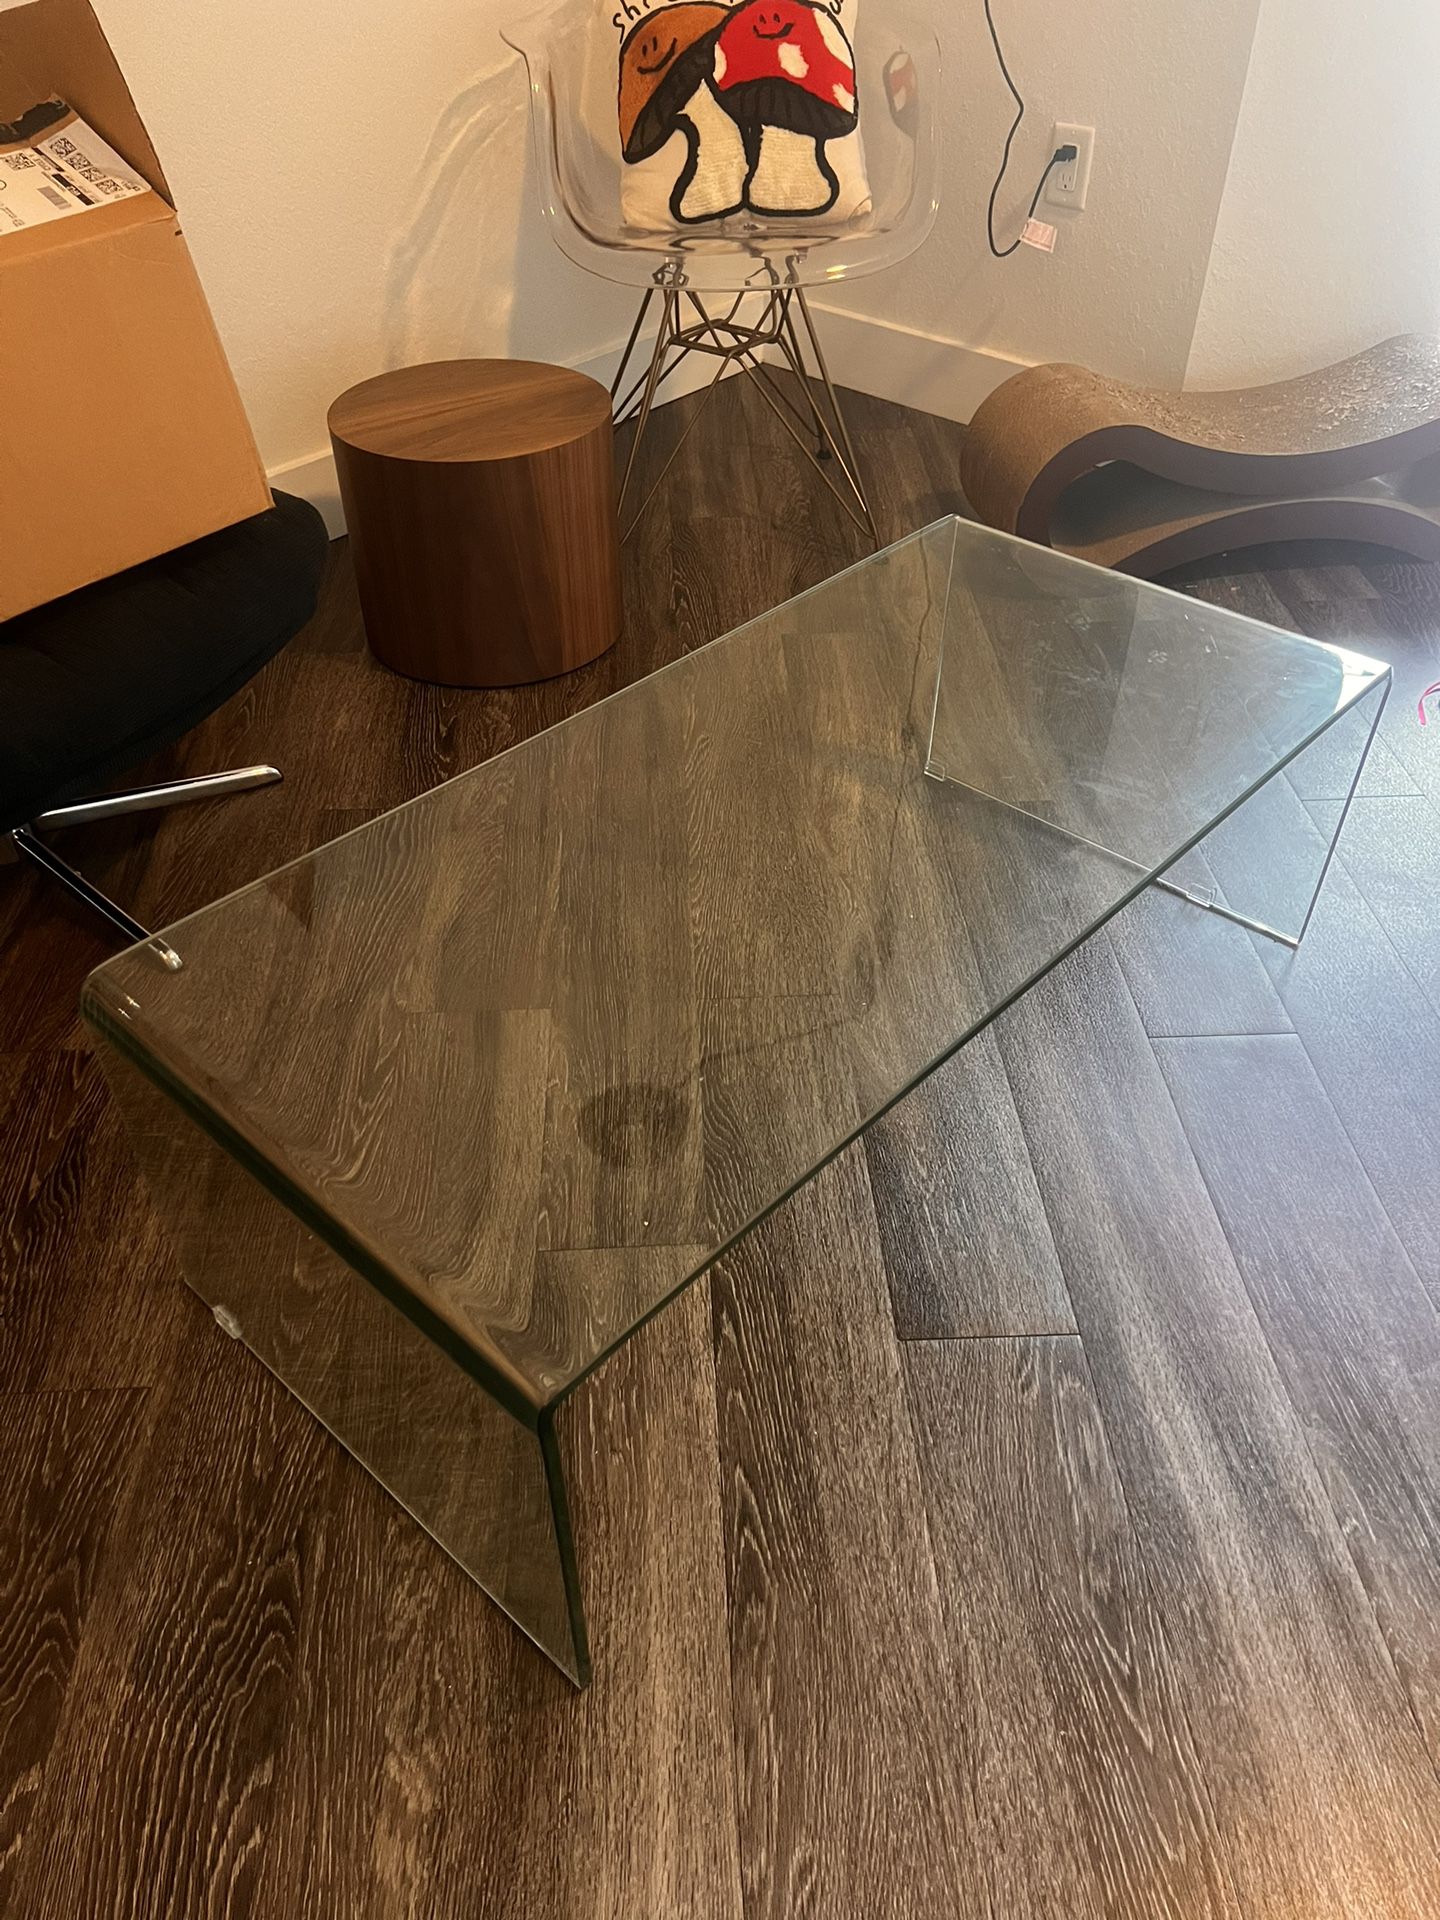 Glass Coffee Table (was $400)